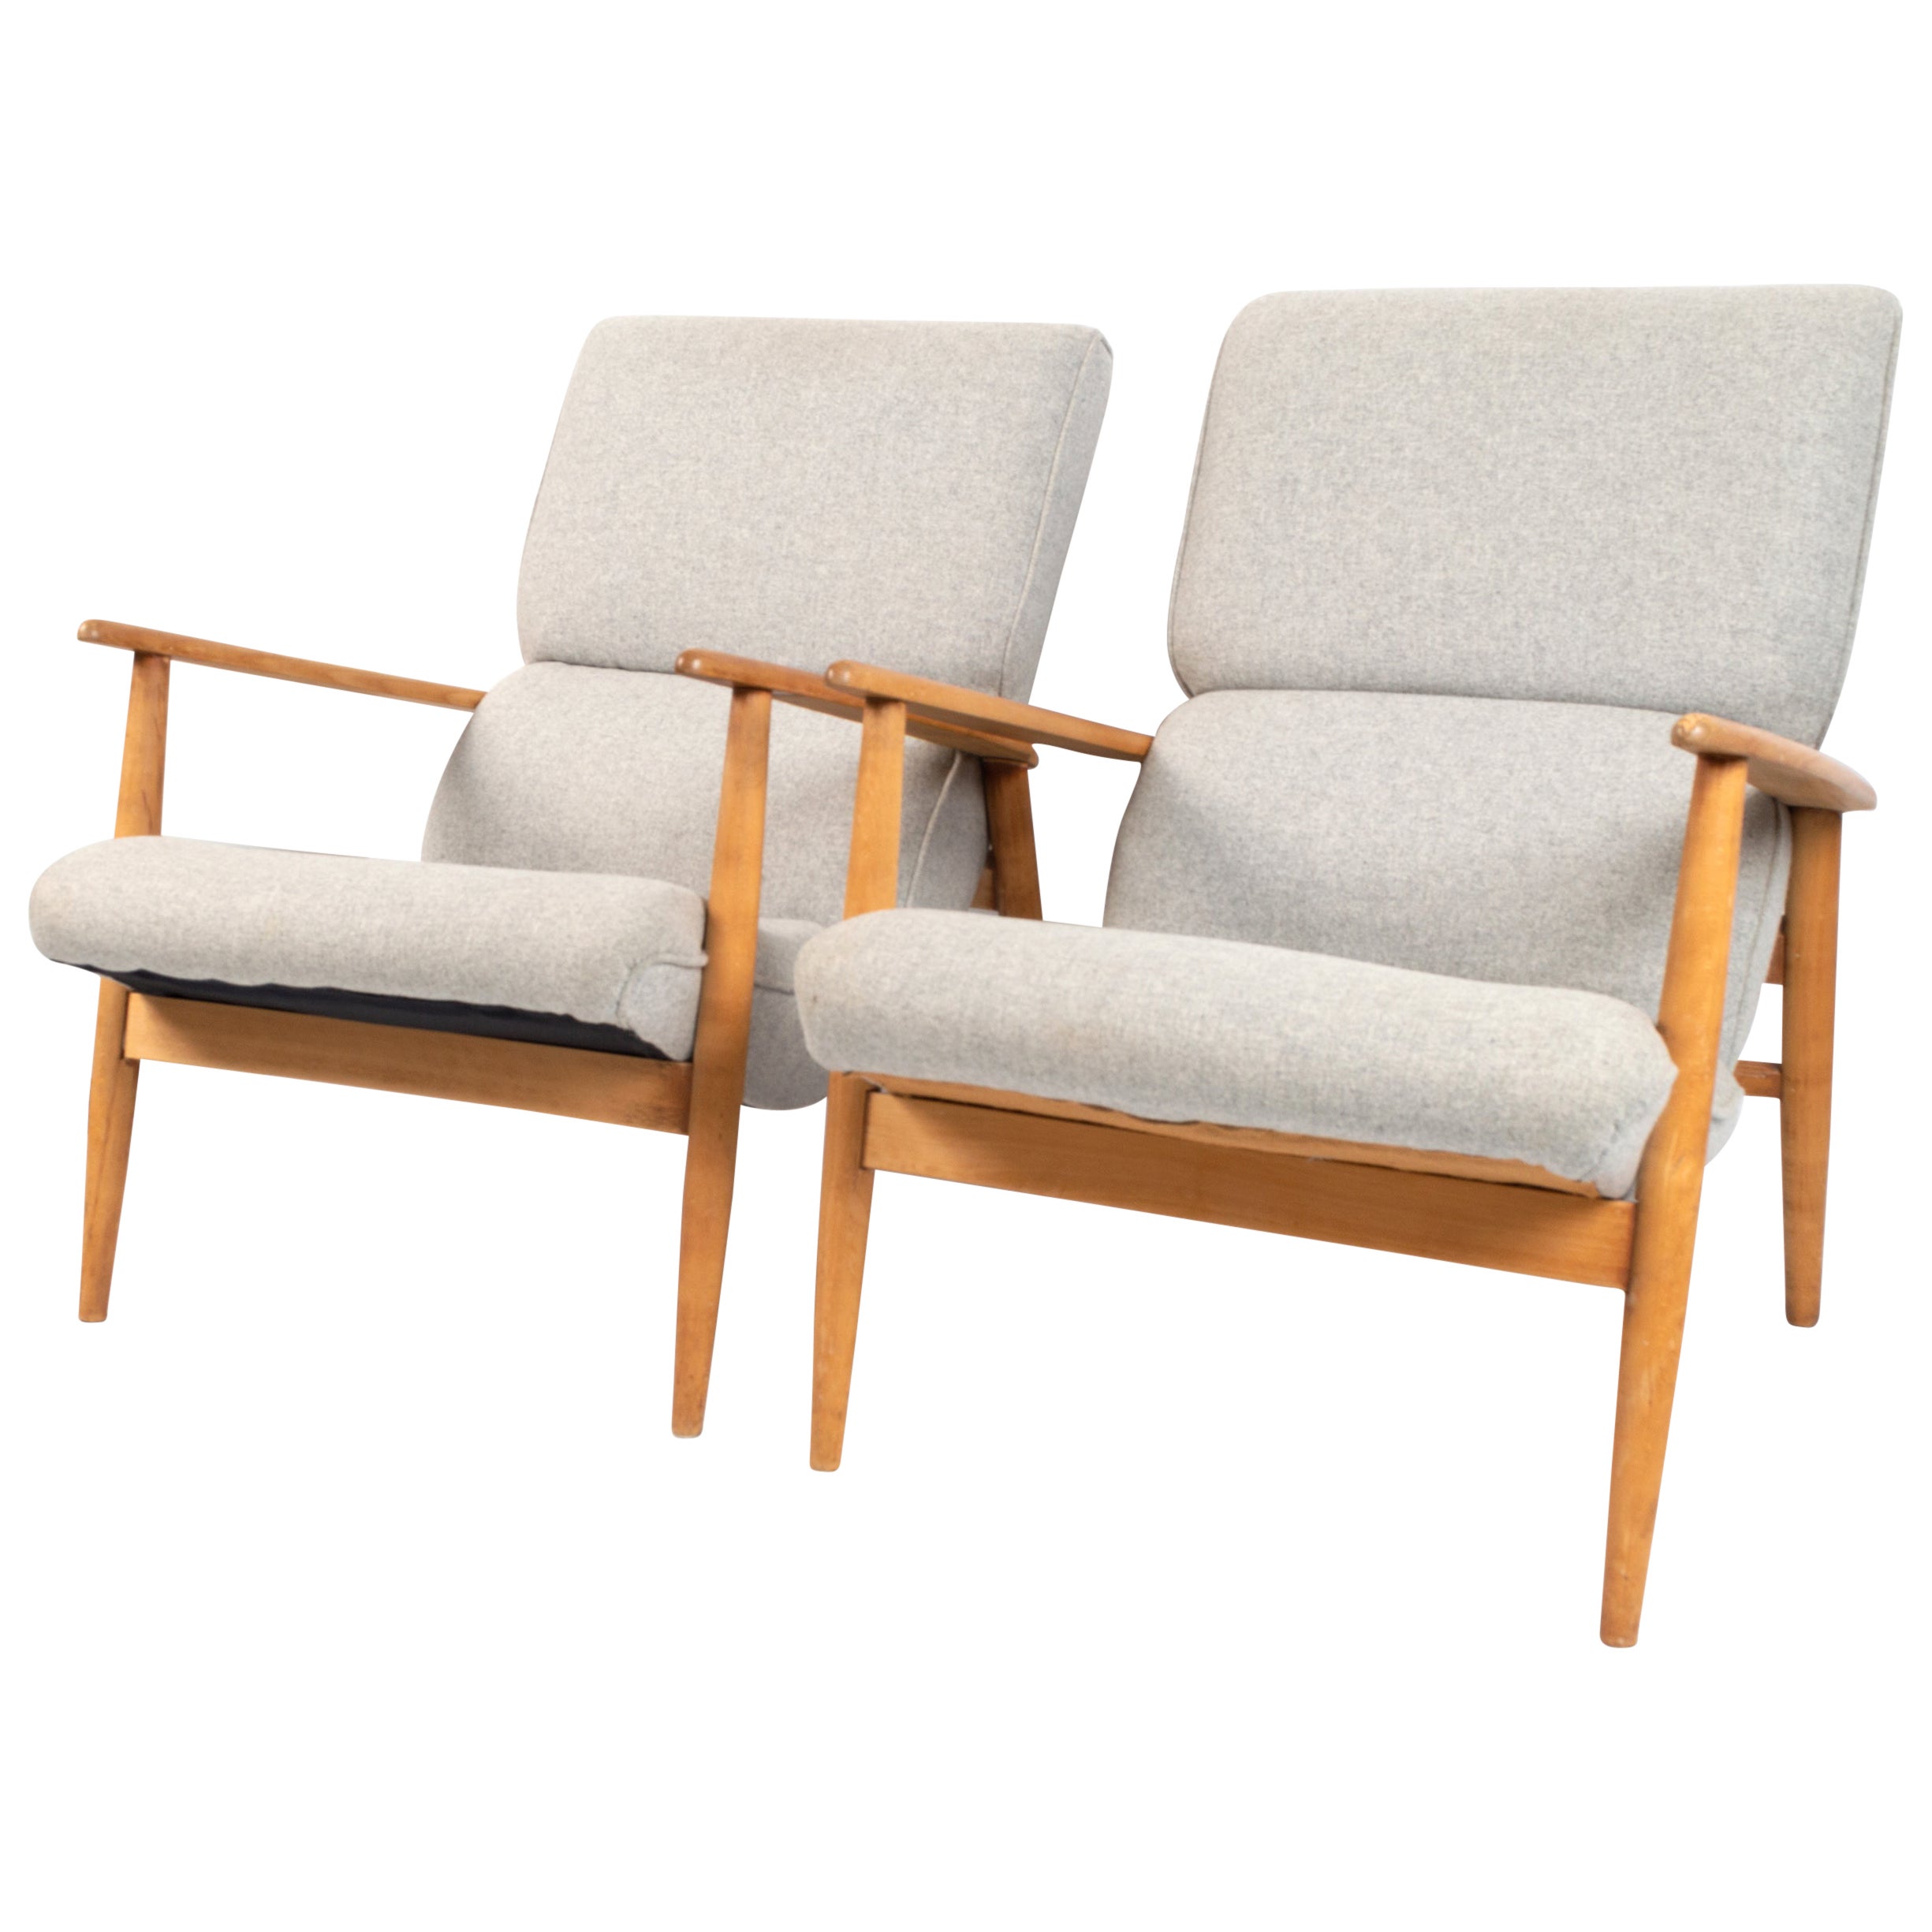 Pair of Mid-Century Danish Lounge Chairs Armchairs Denmark, C.1950 For Sale